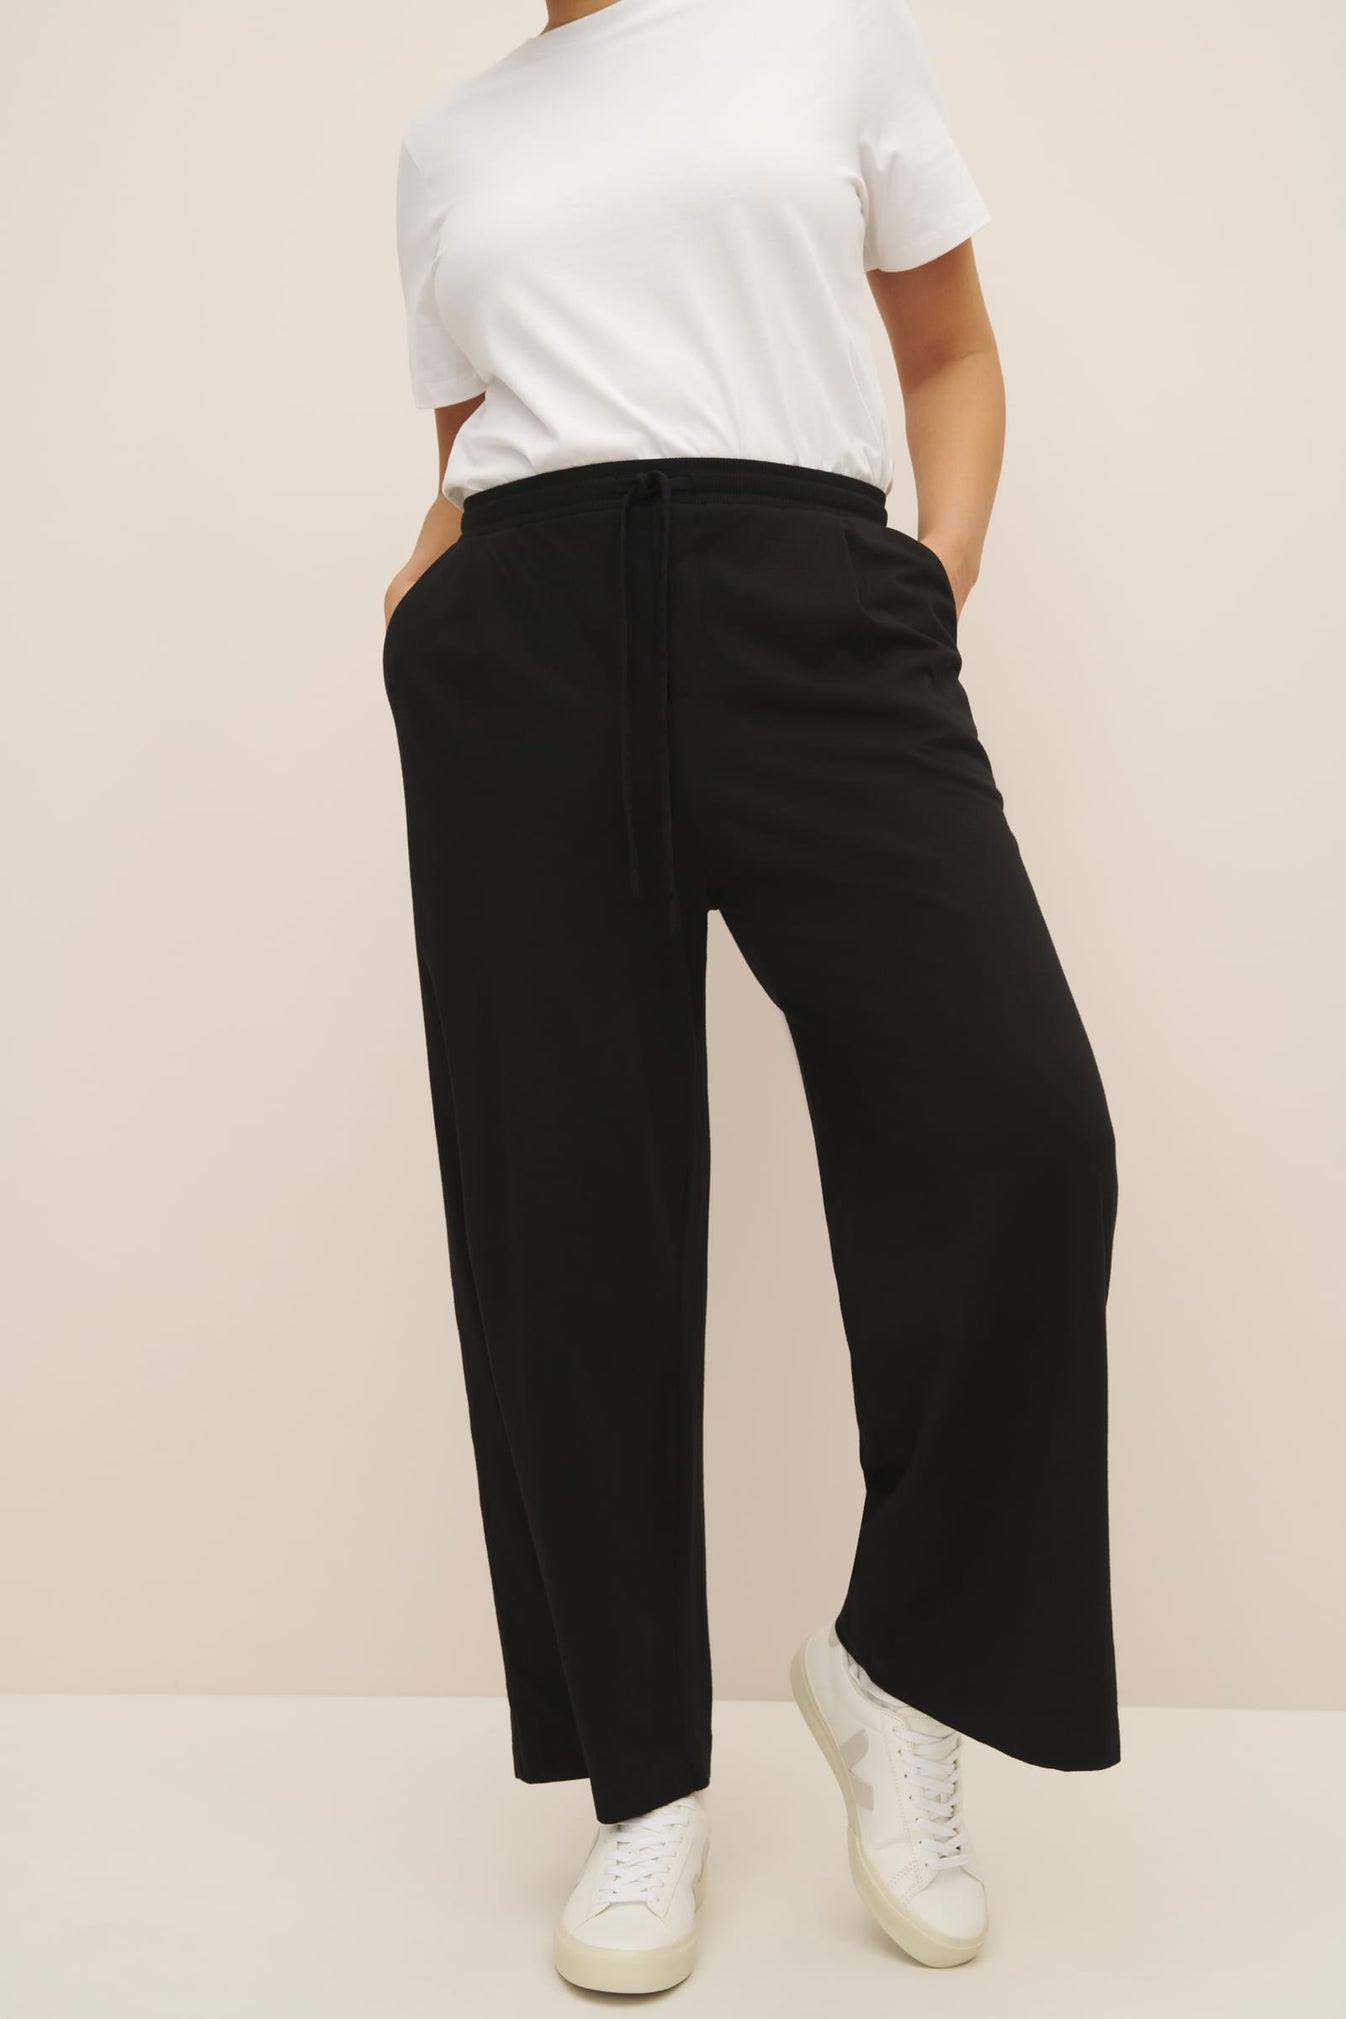 Wide Leg Pant - Black | Relaxed Fit | Elastic Waistband | Kowtow